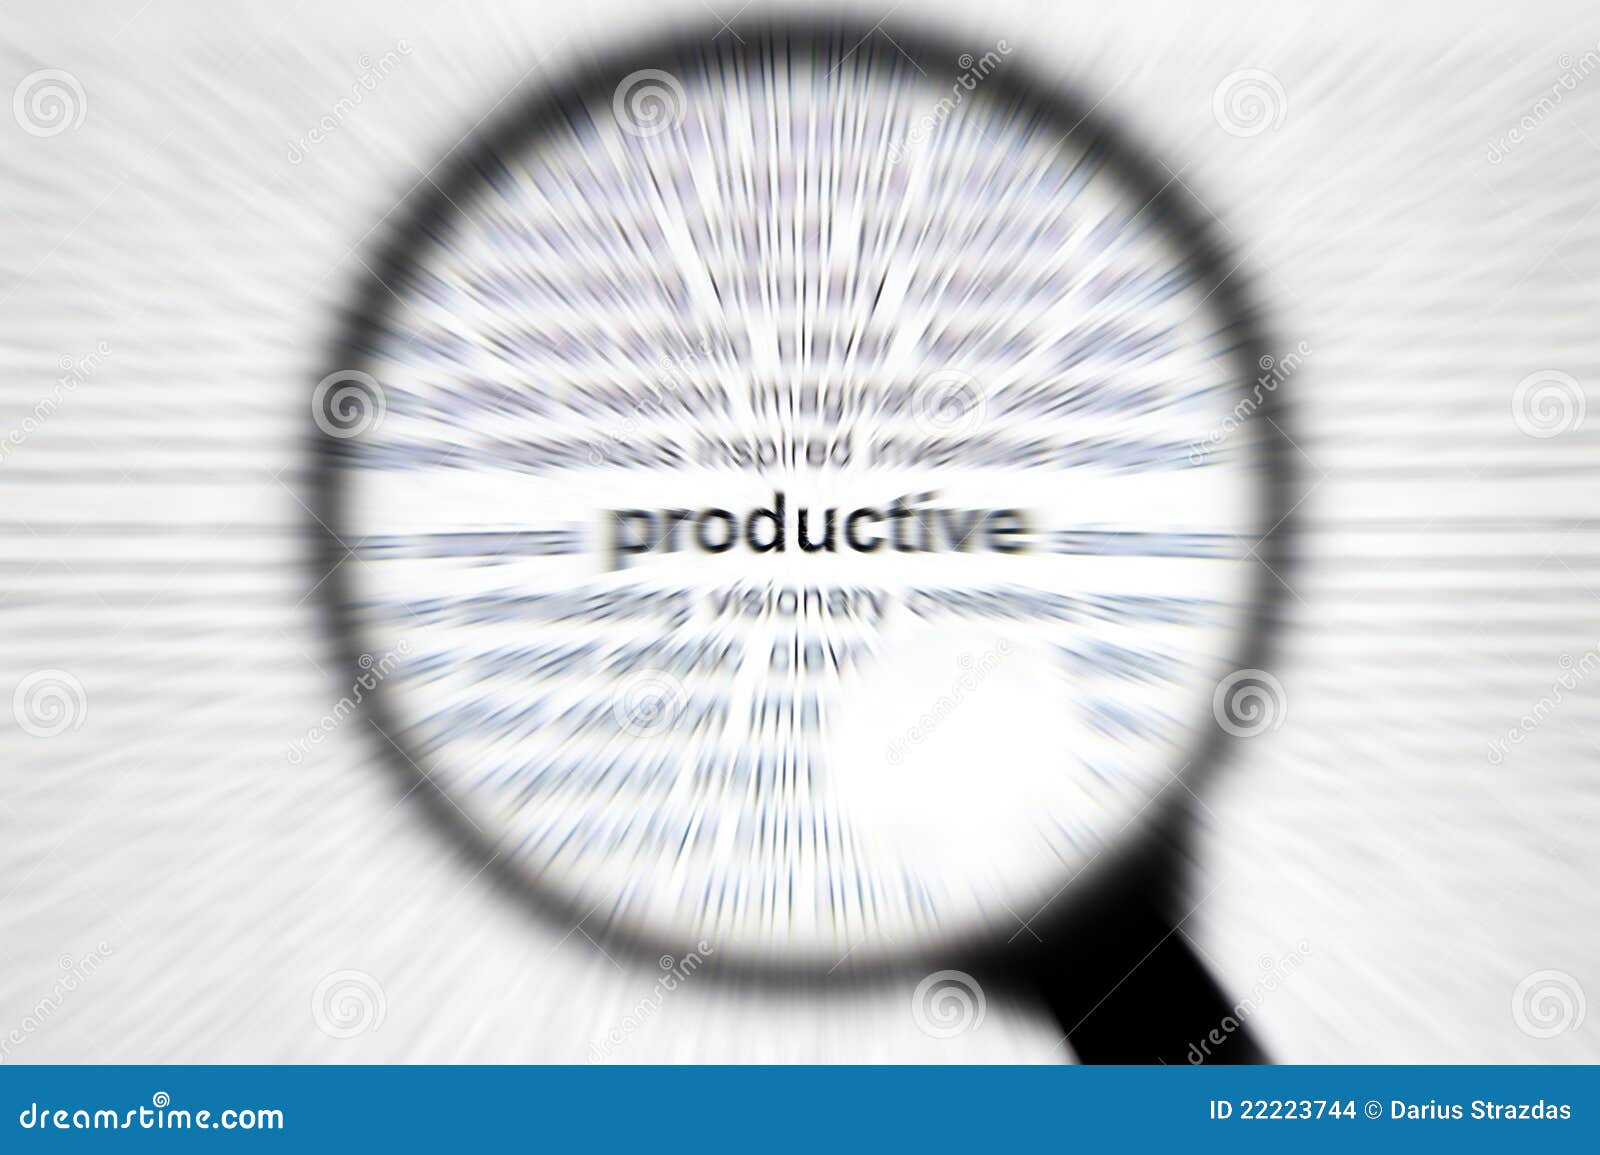 focus or concentrate productive business concept